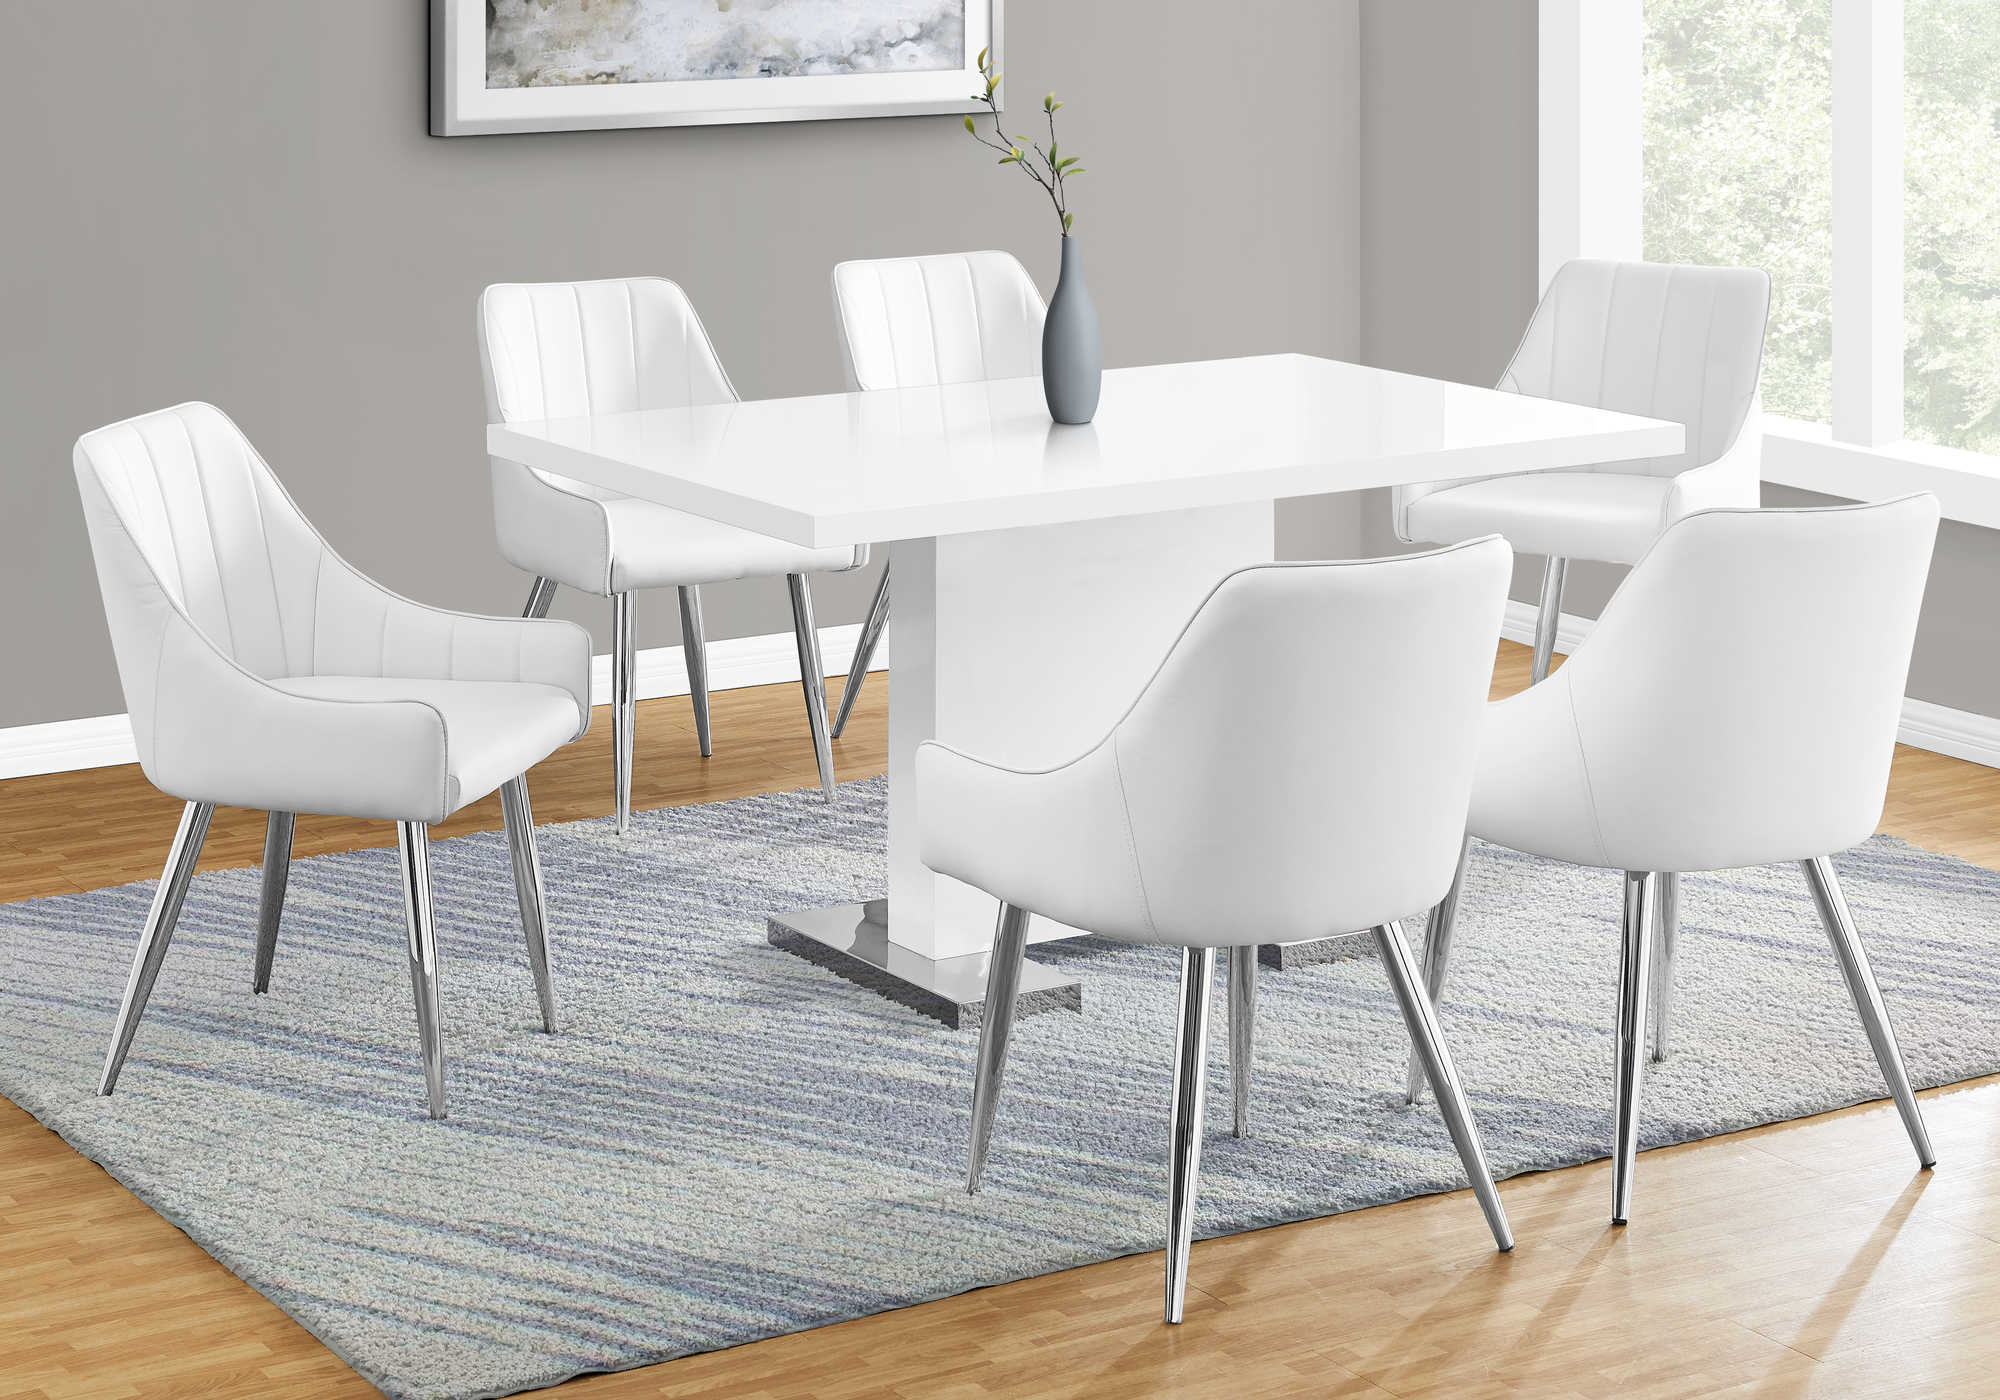 DINING TABLE - 35"X 60" / HIGH GLOSSY WHITE 